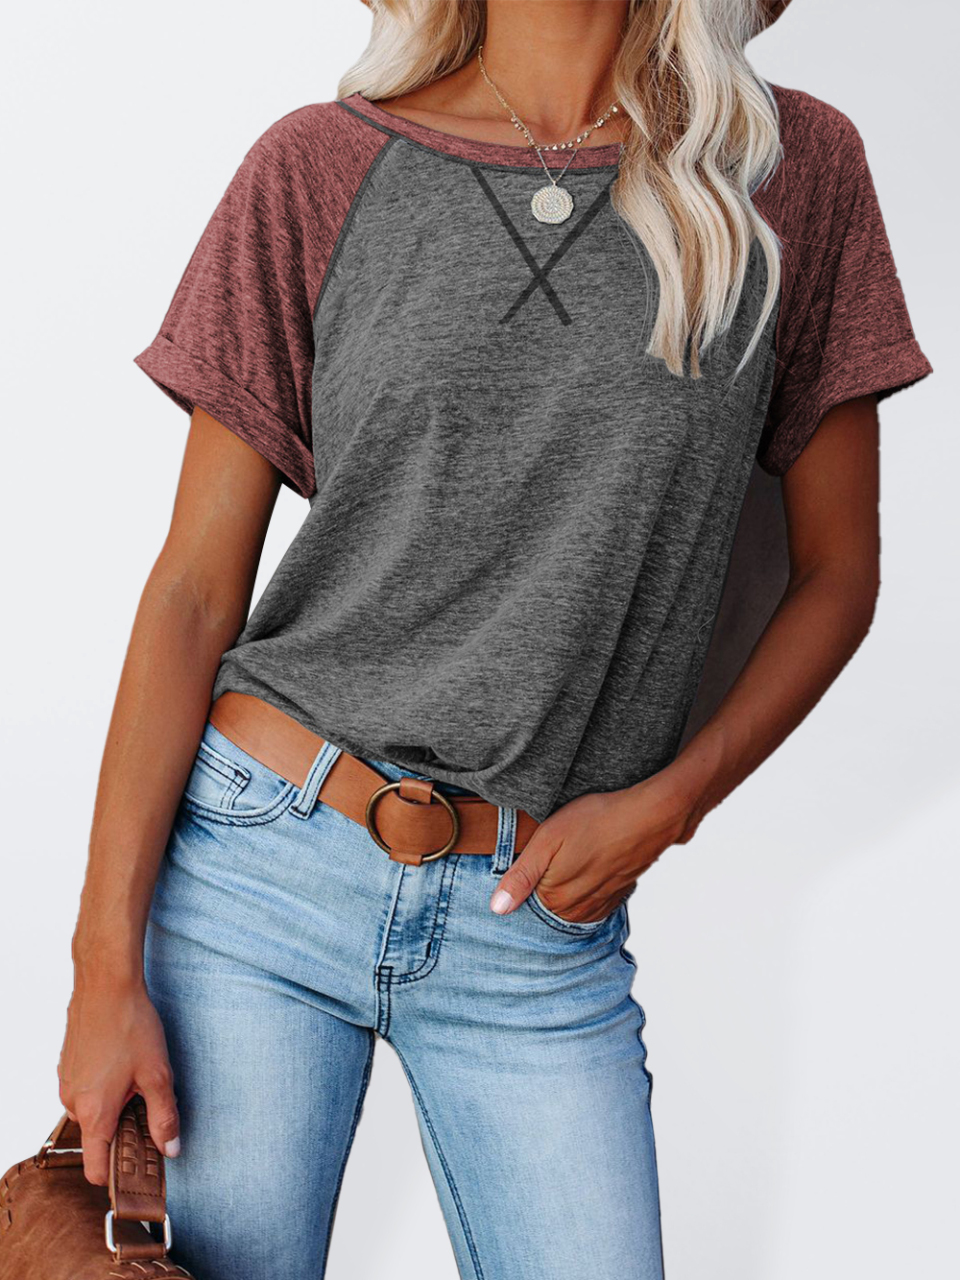 Ladies Colorblock Casual Round Neck Short Sleeve T-Shirt